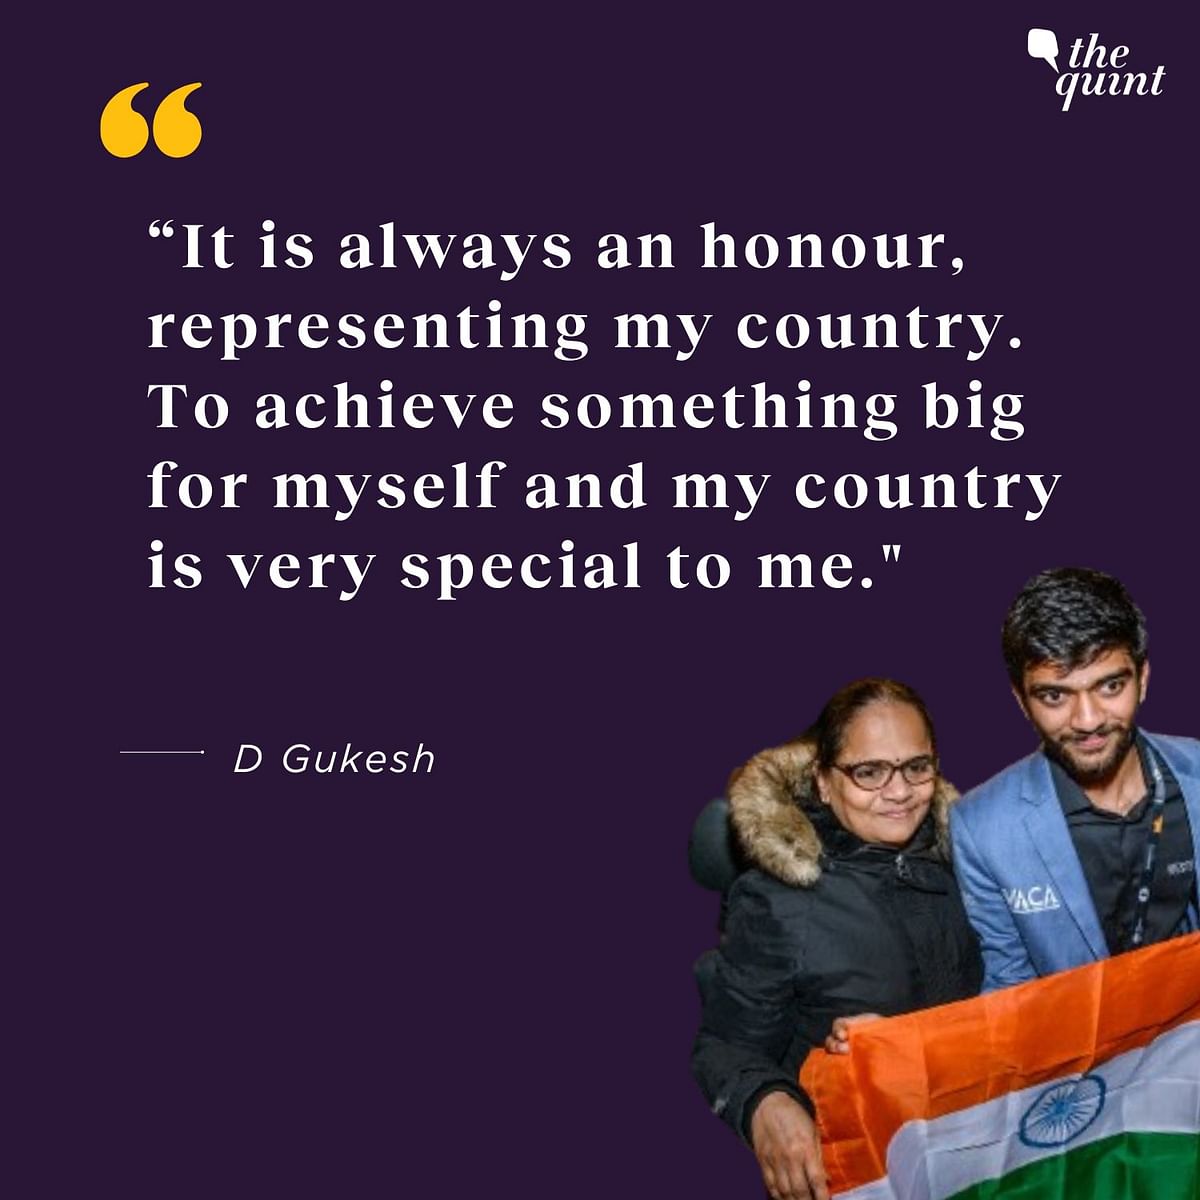 Champion of the 2024 Candidates Tournament, D Gukesh says it was 'very special' to represent India.